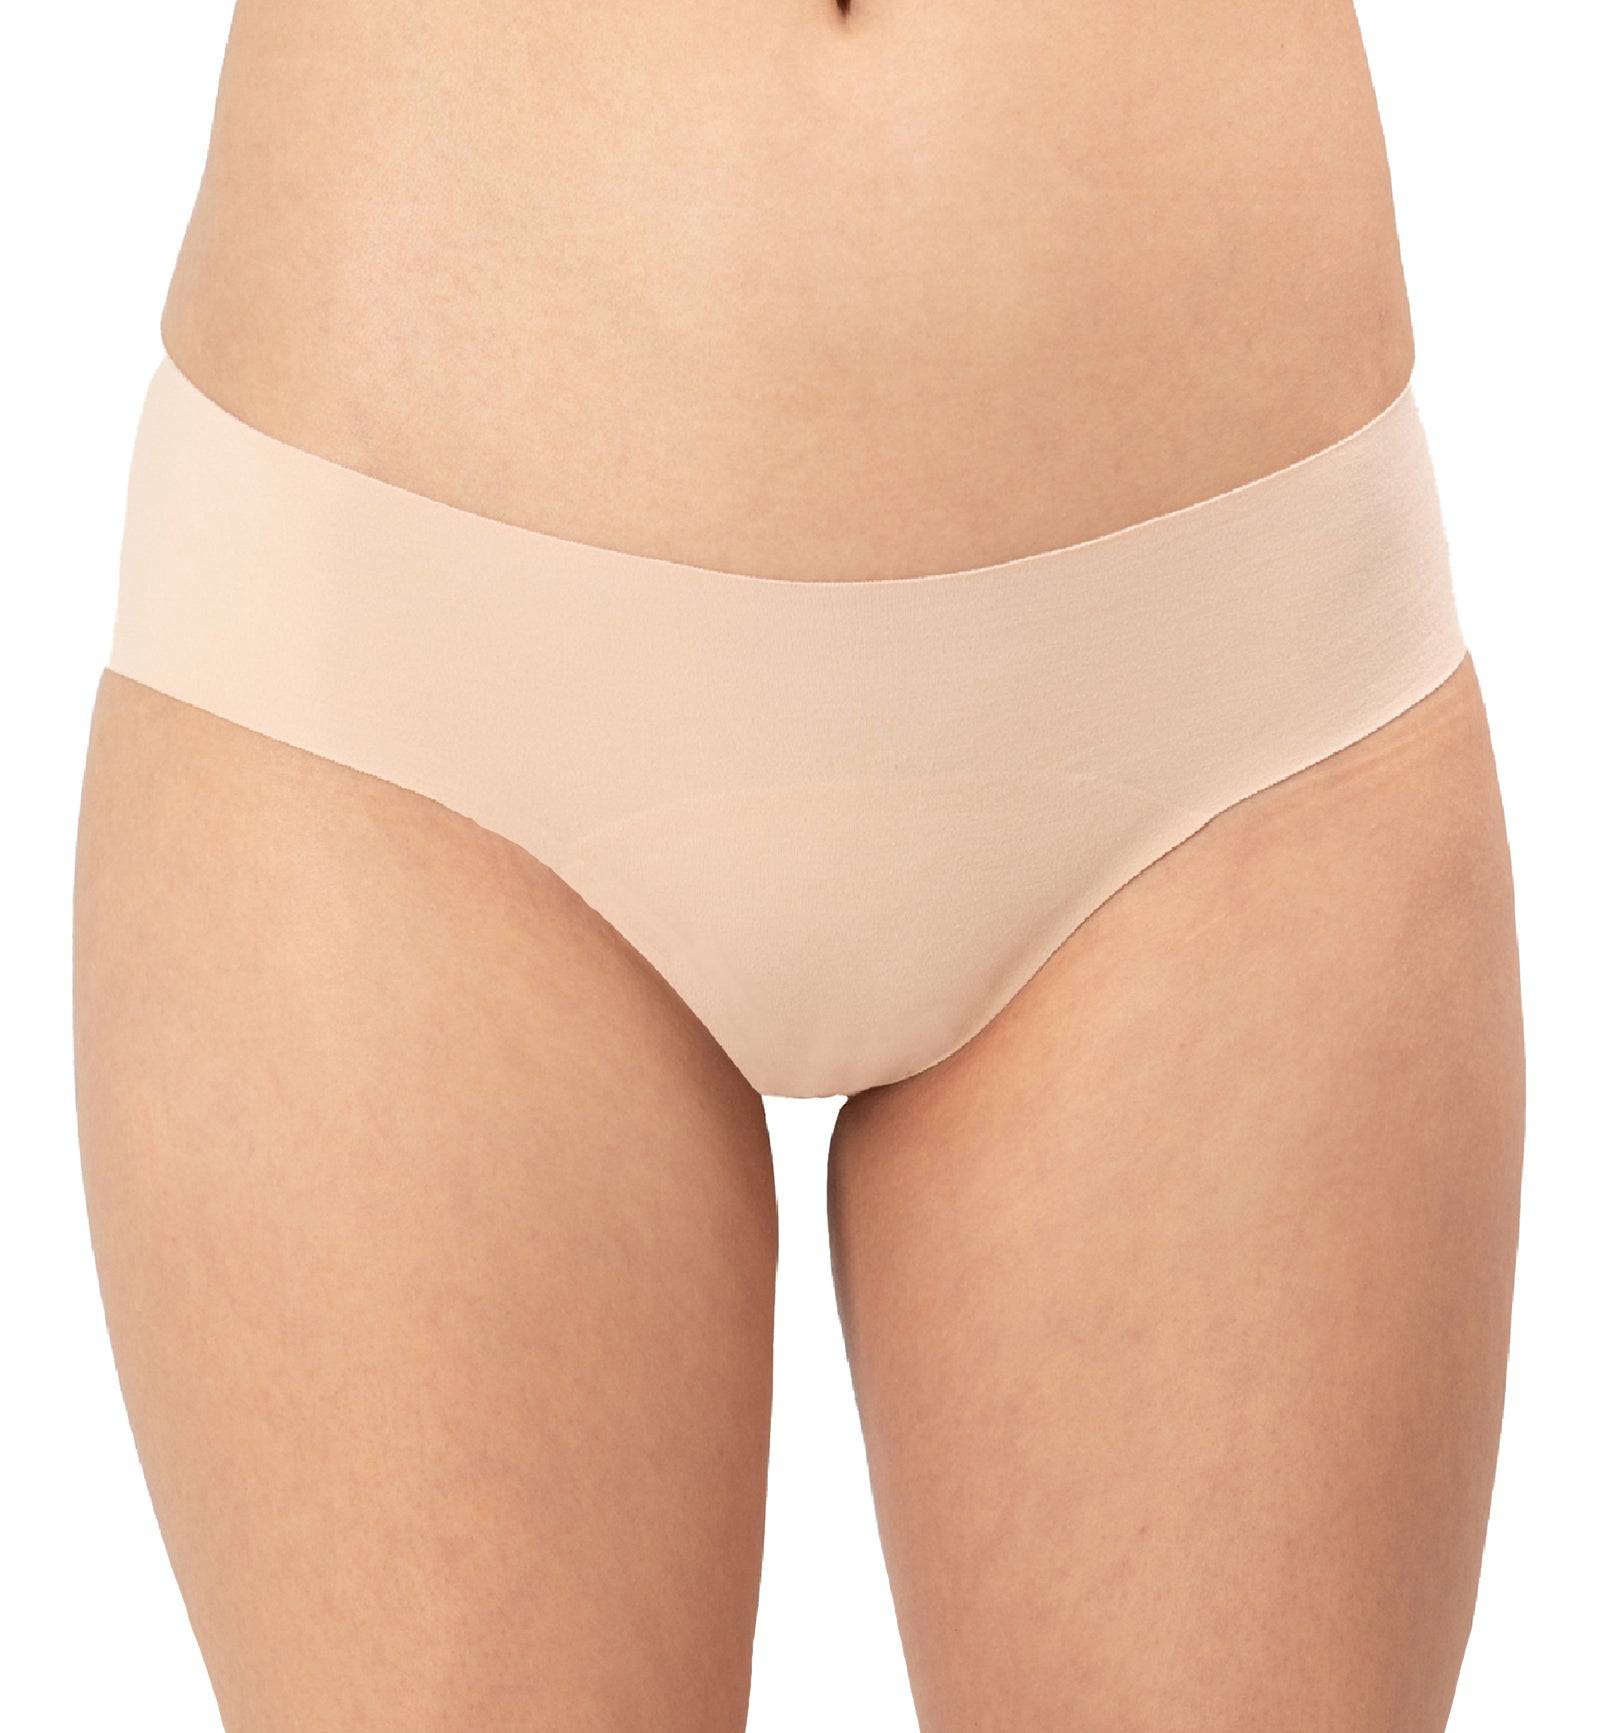 Panty Promise Low Rise Hipster,XS,Pale - Pale,XS